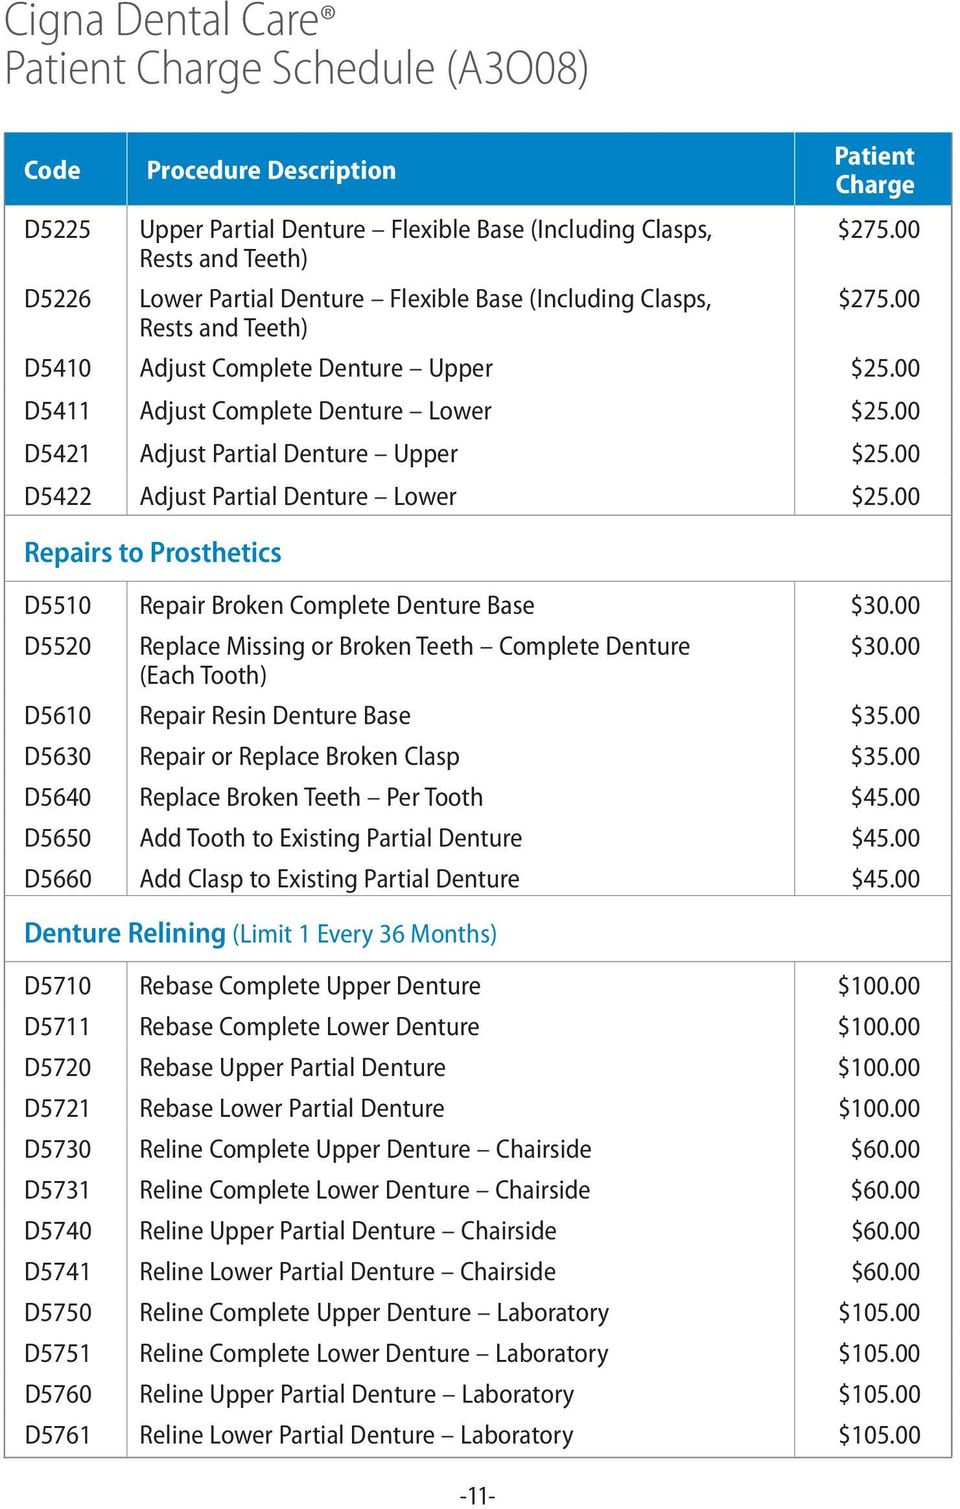 Cigna dental patient charge schedule how much does change healthcare pay patient service reps